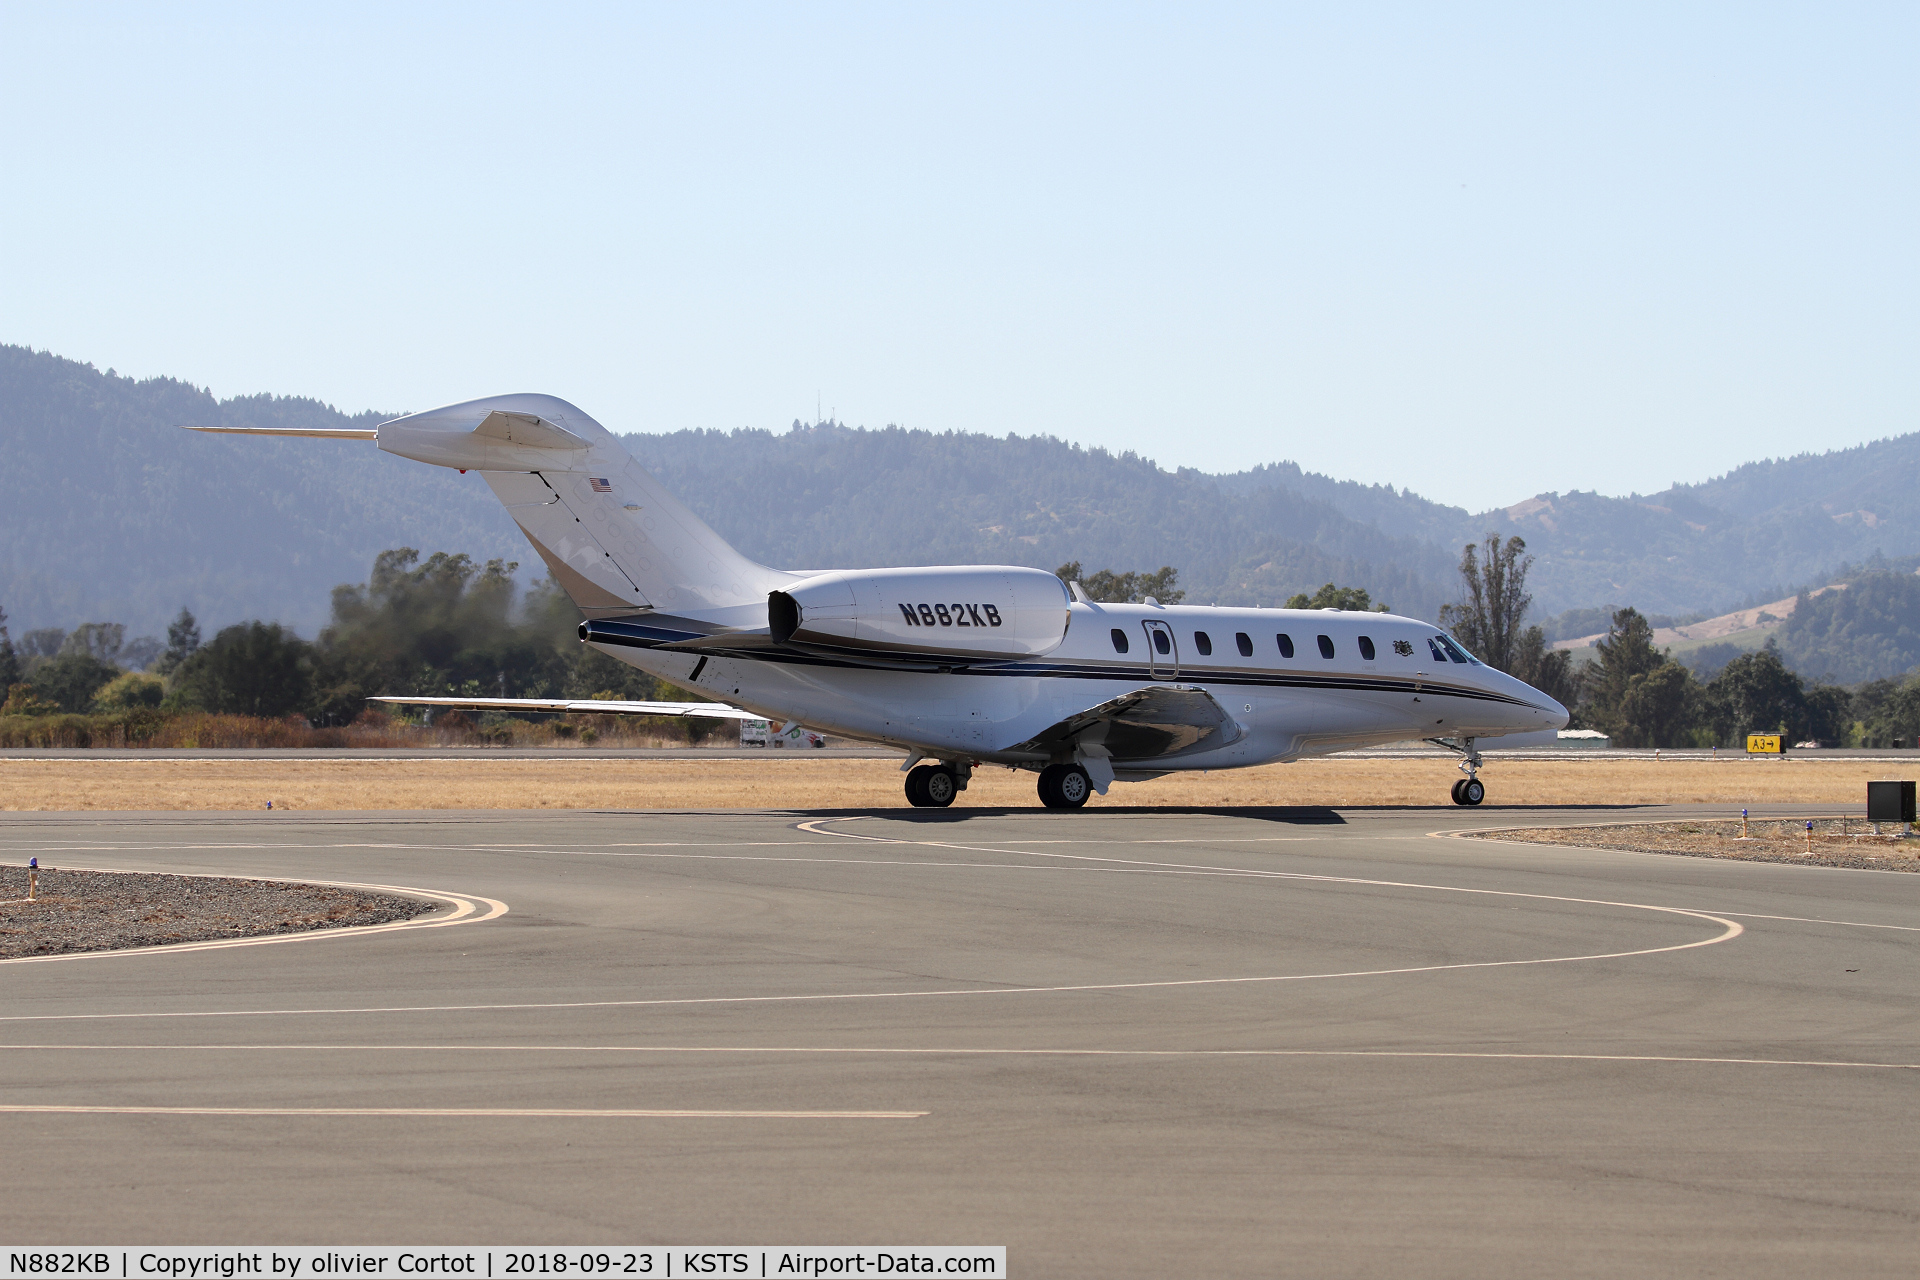 N882KB, 2003 Cessna 750 Citation X C/N 750-0216, about to take off during the Santa Rosa airshow